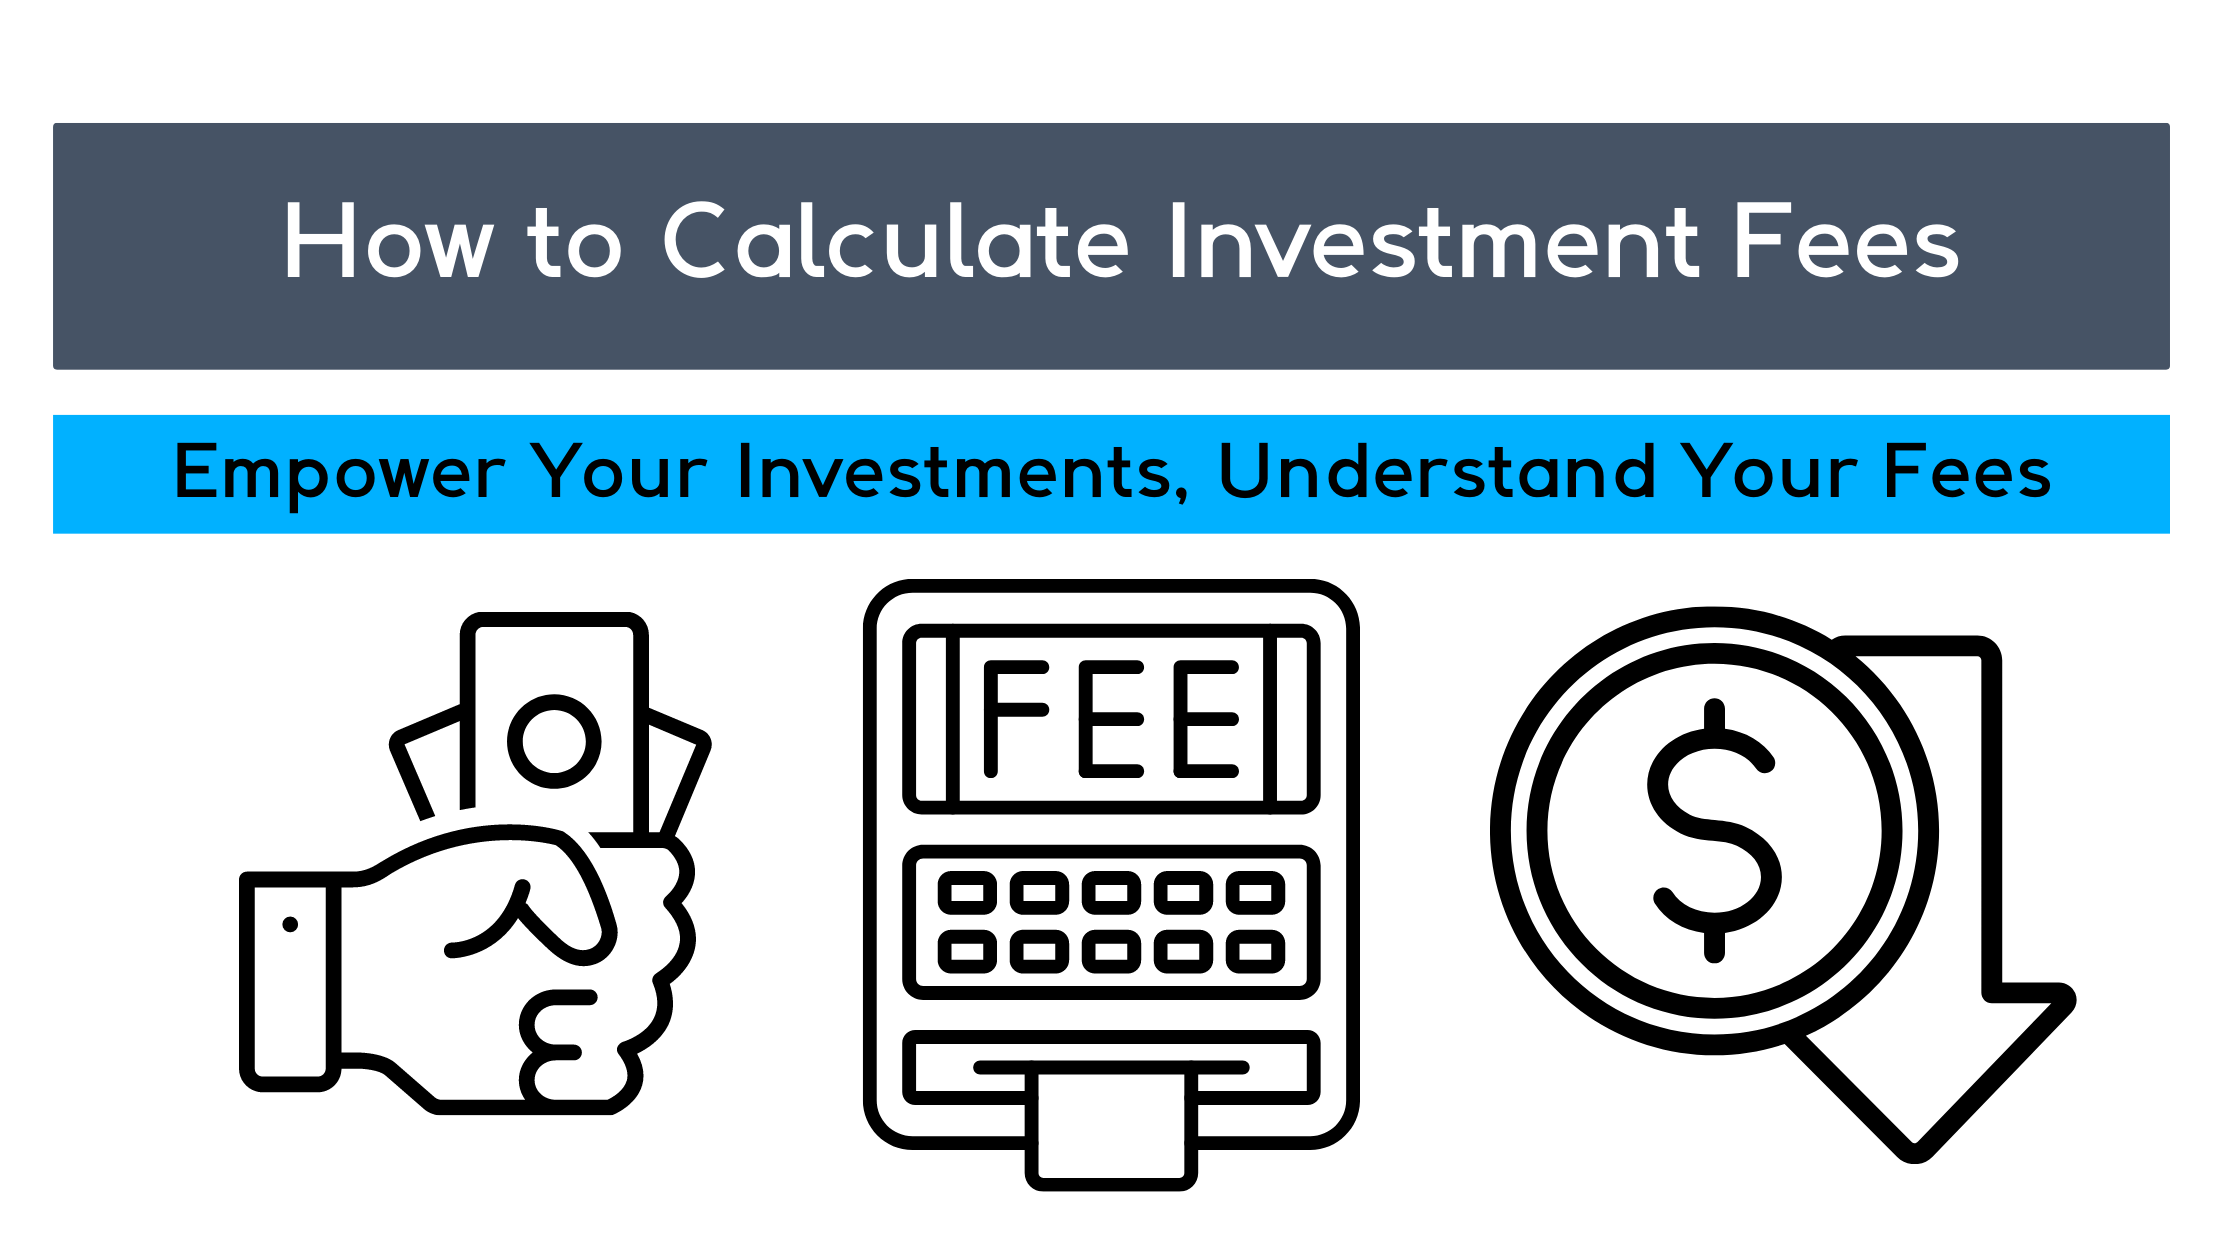 Hand holding bank notes, a calculator with 'FEE' on screen, and a cash symbol with an arrow pointing down, all symbolizing the concept of calculating investment fees.